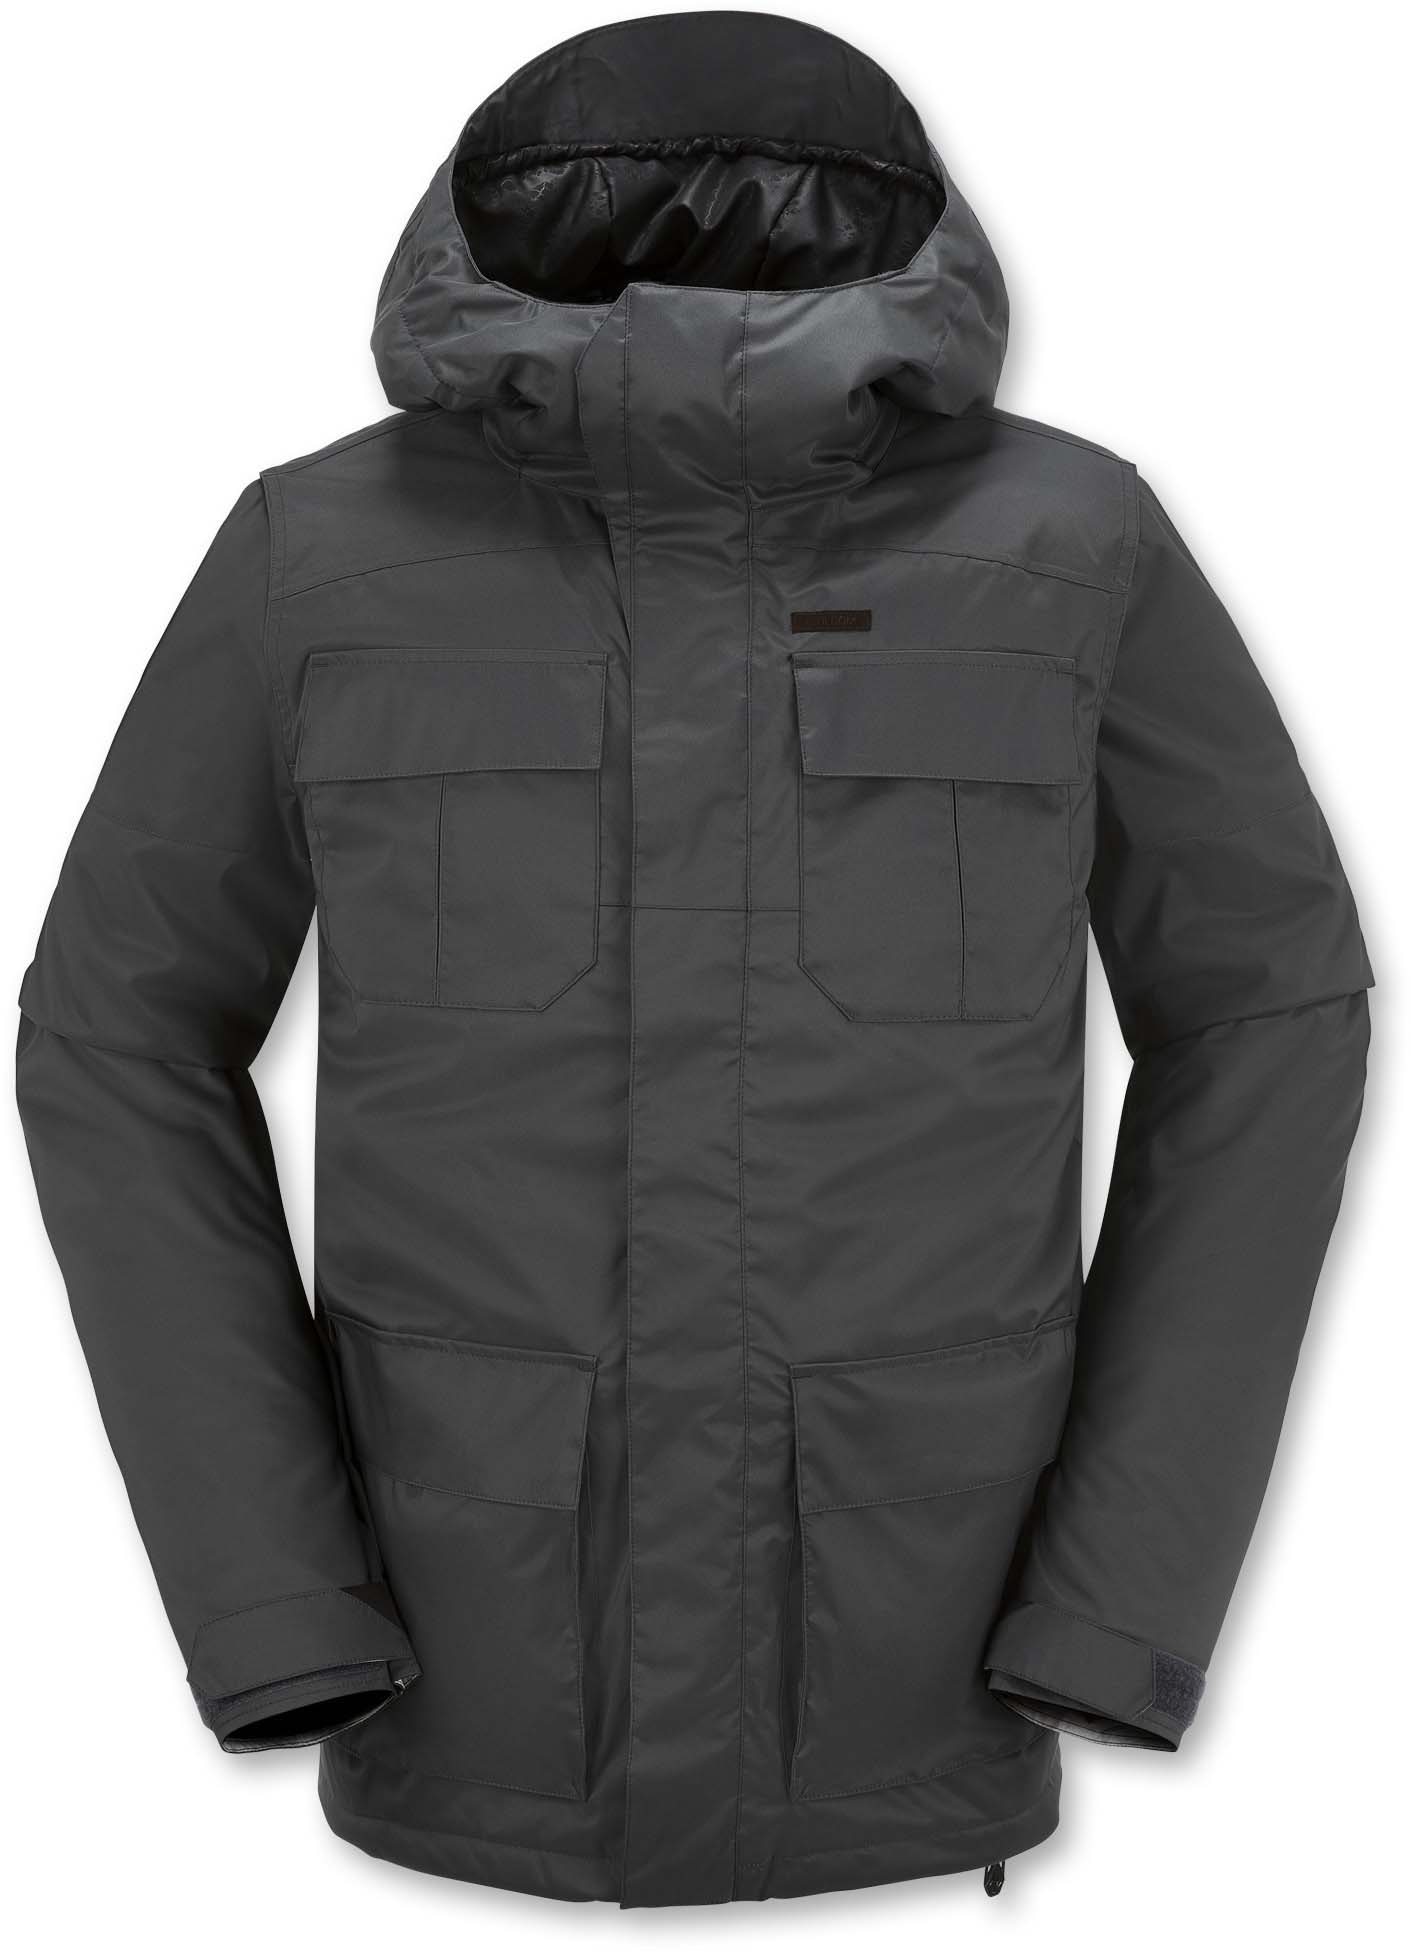 Volcom Alternate Insulated Snowboard Jacket Review - The Good Ride